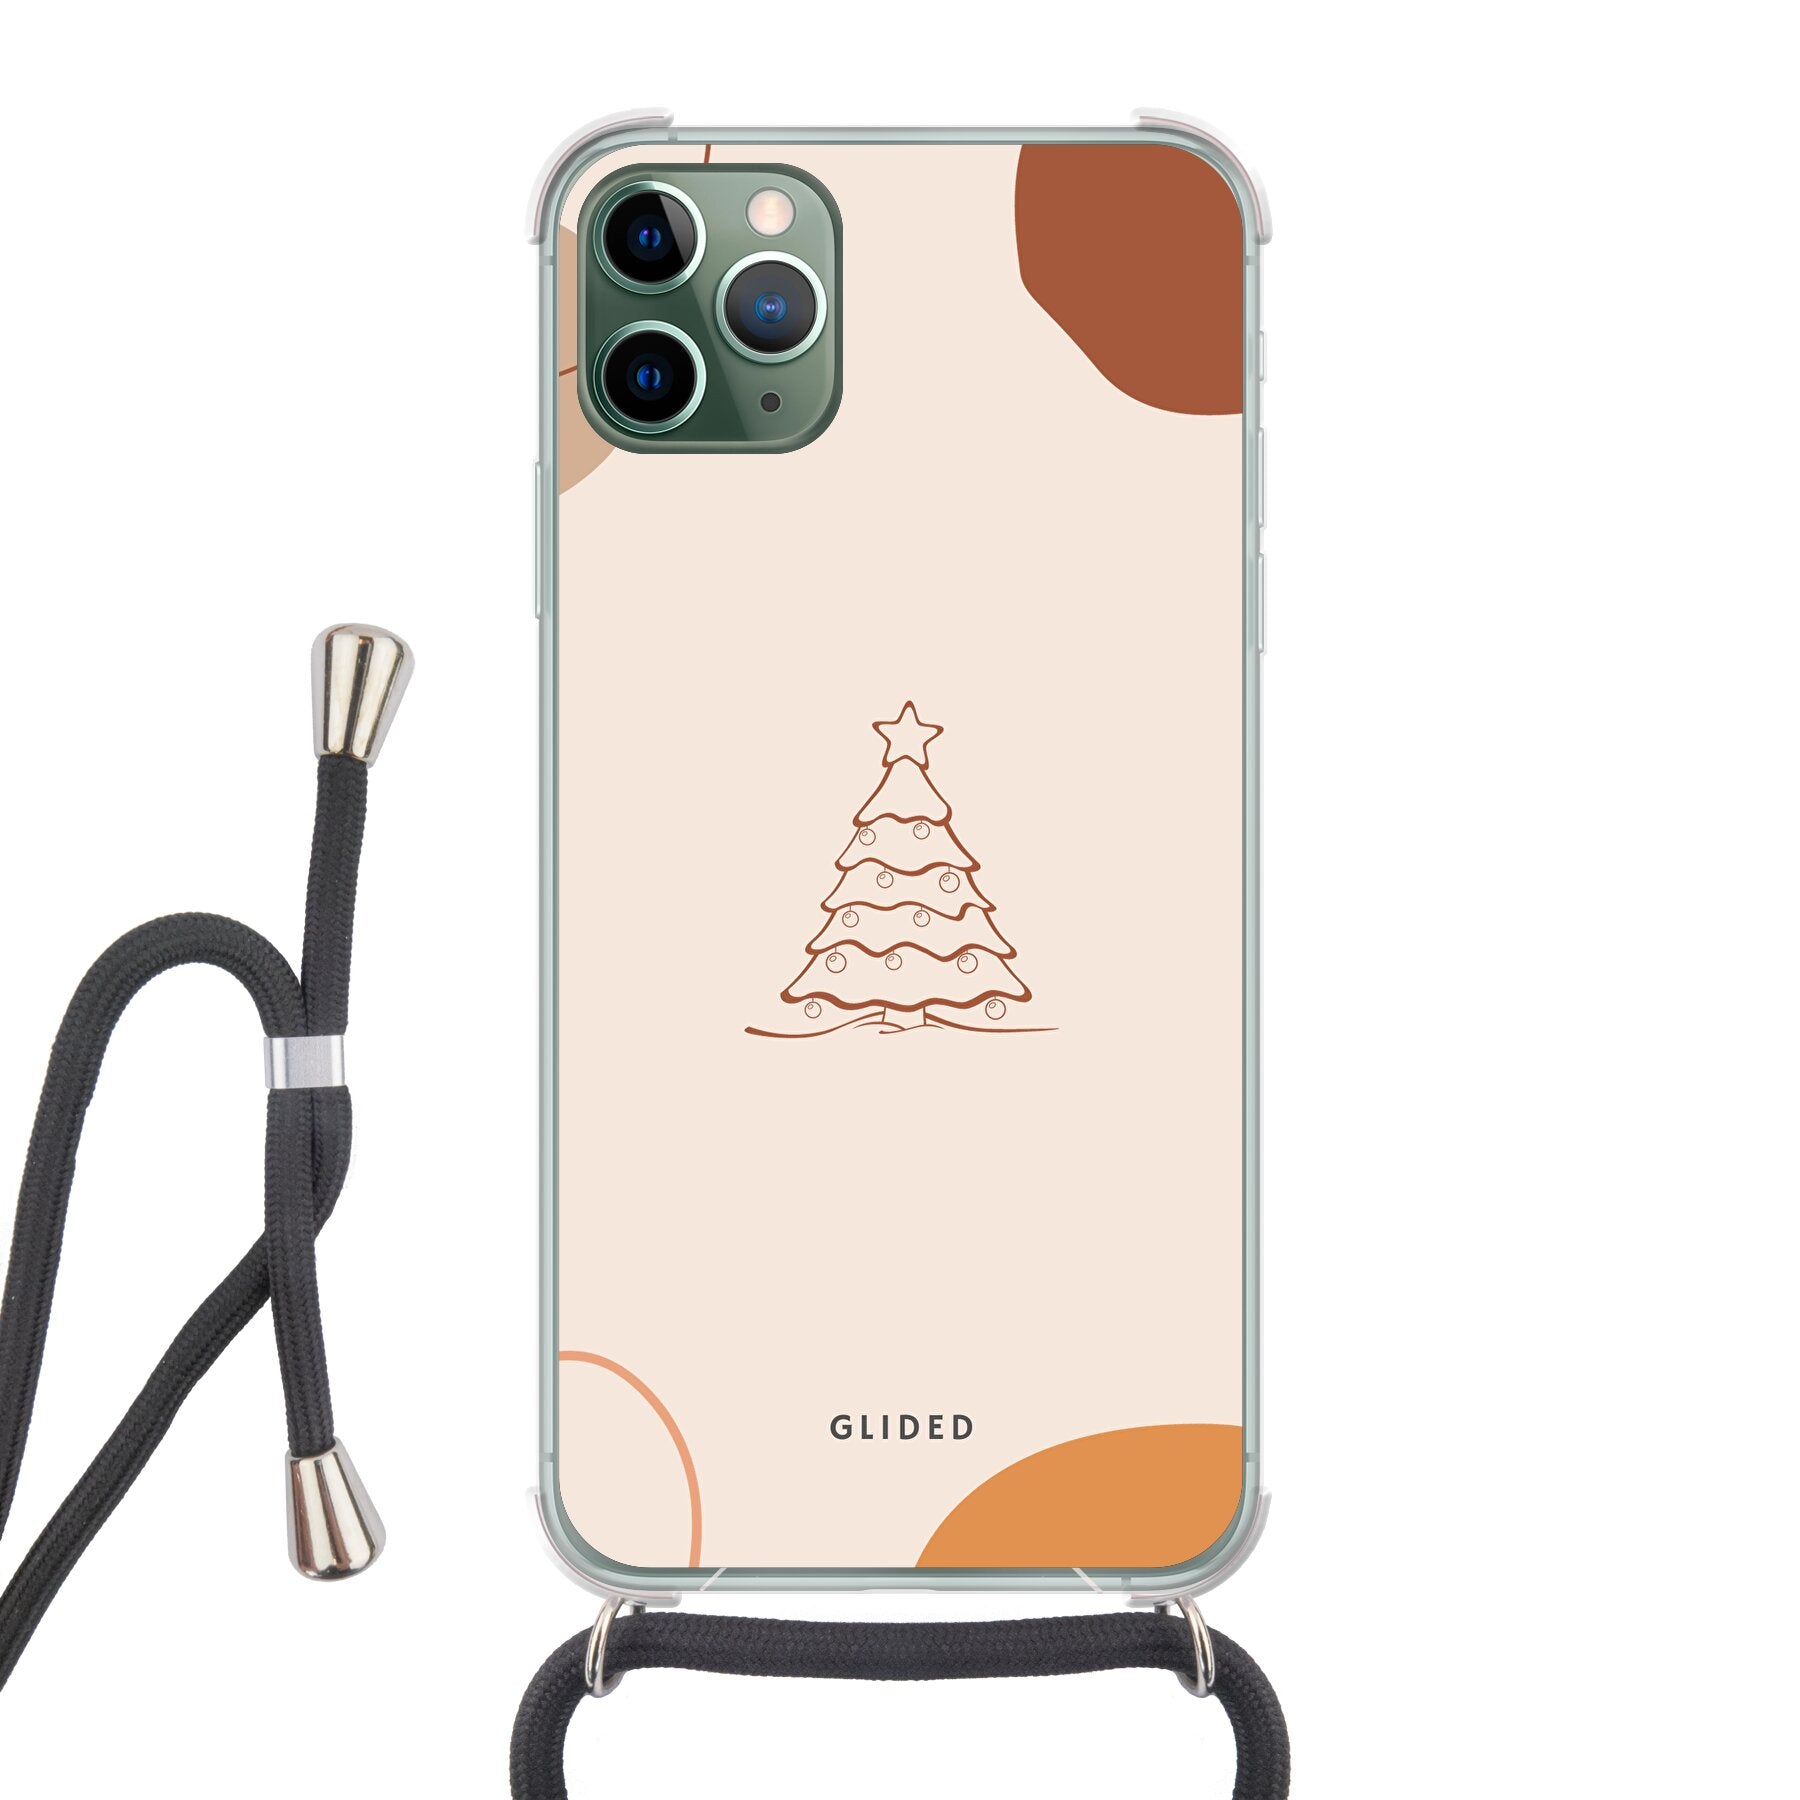 Wintertouch - iPhone 11 Pro Max Handyhülle Crossbody case mit Band